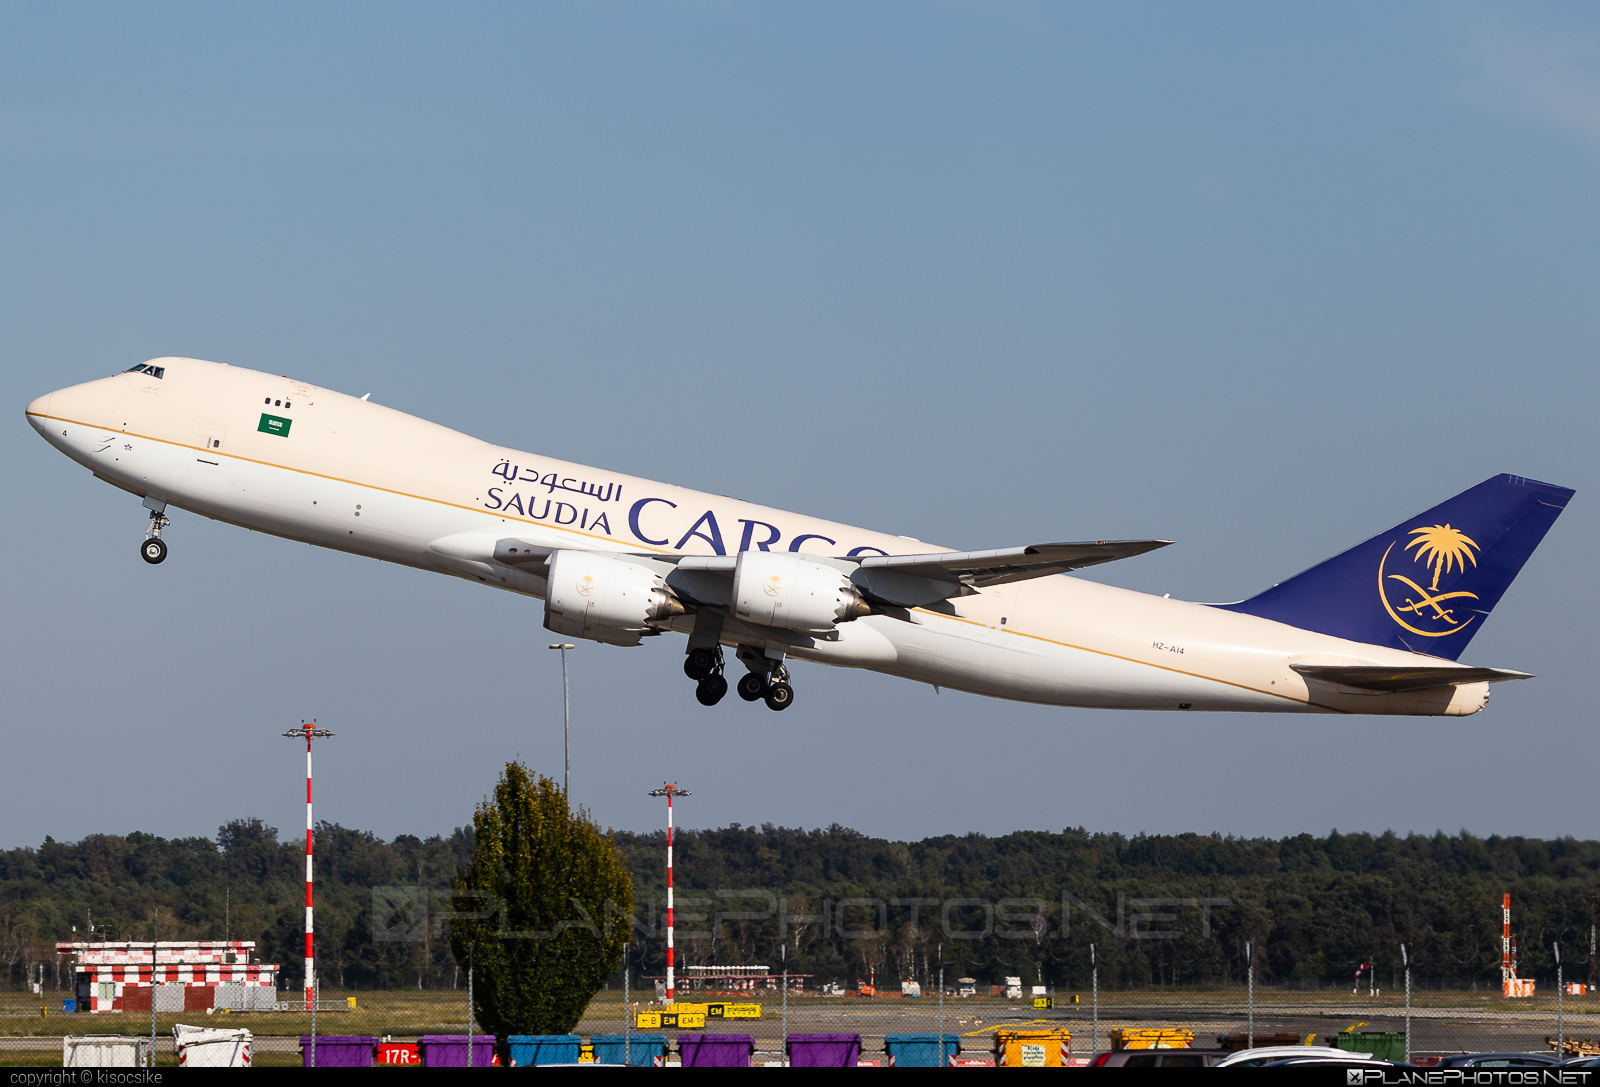 Boeing 747-8F - HZ-AI4 operated by Saudi Arabian Airlines Cargo #b747 #b747f #b747freighter #boeing #boeing747 #jumbo